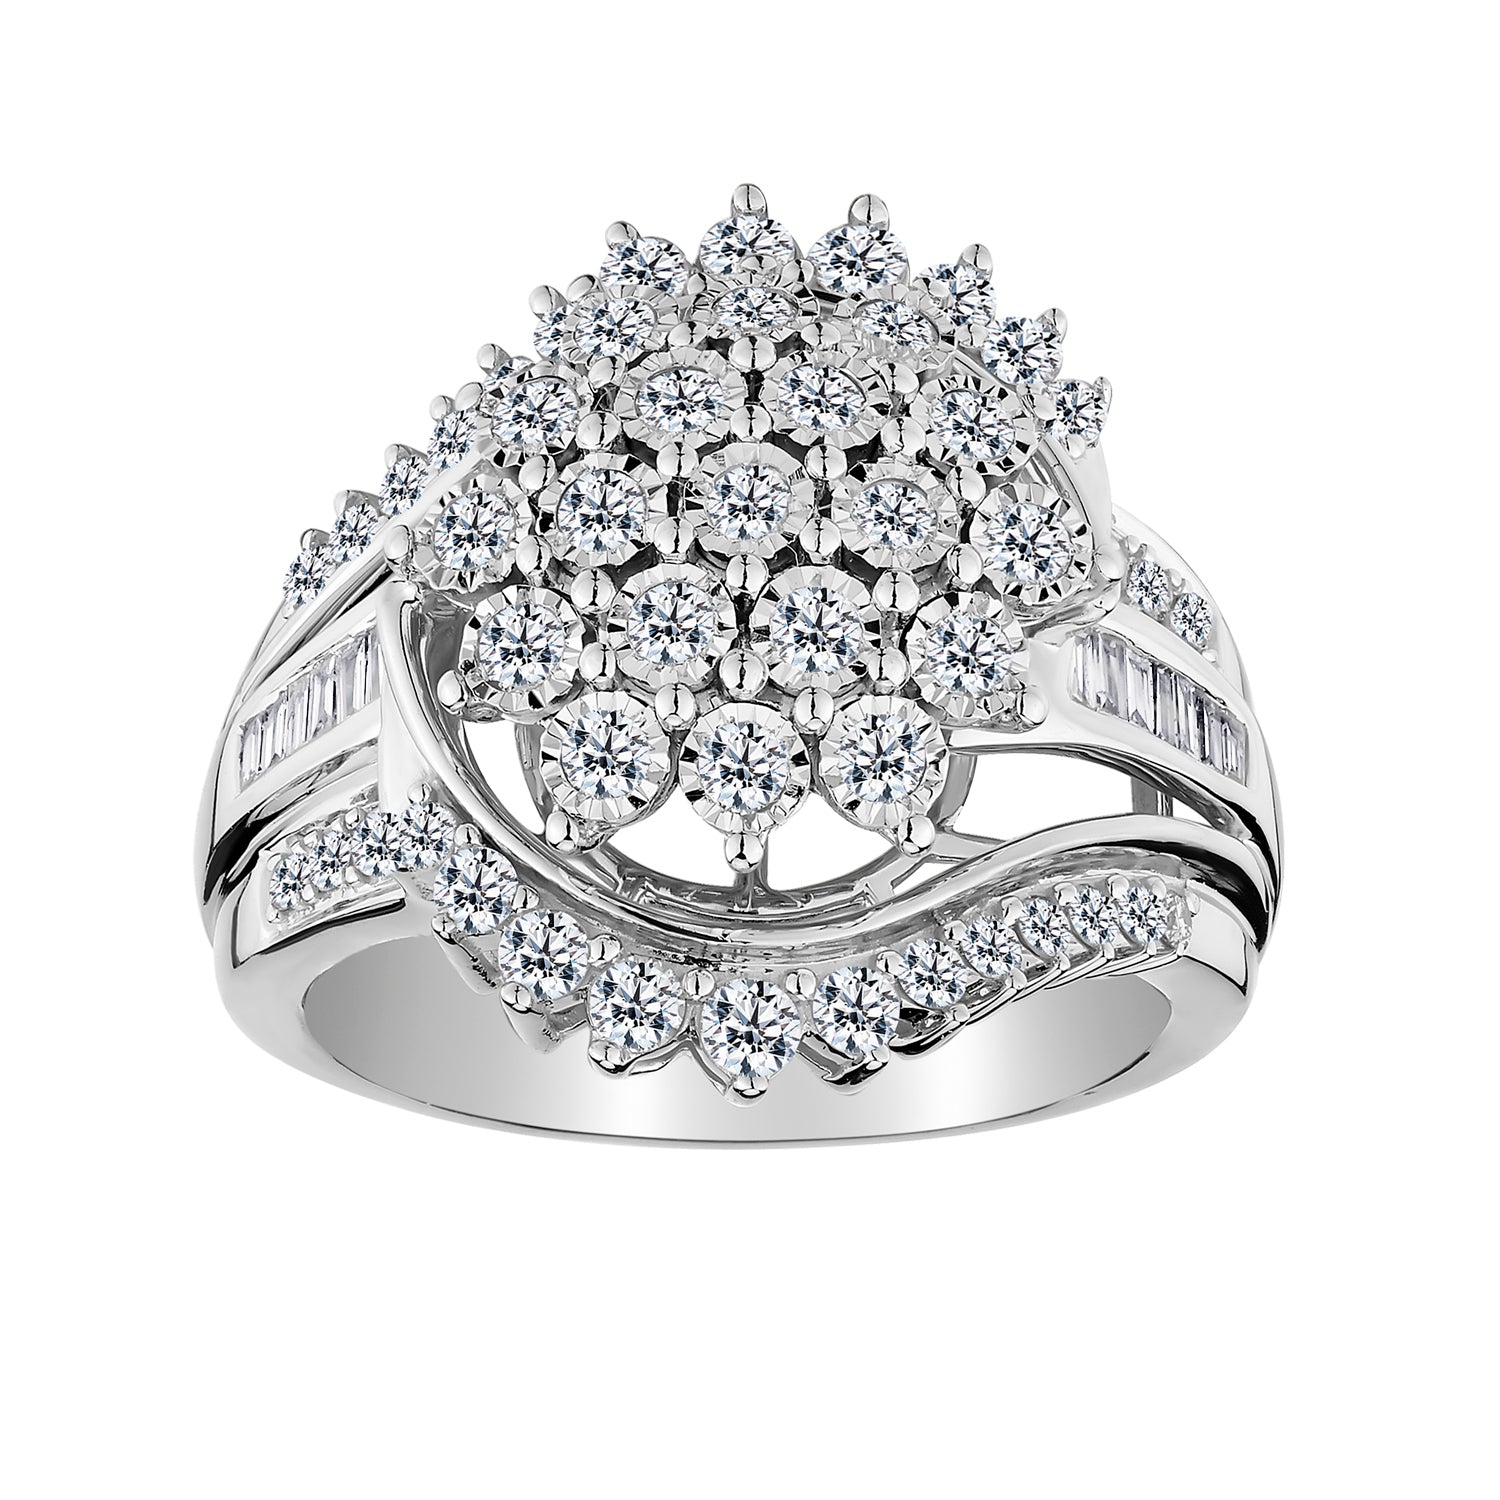 1.00 CARAT DIAMOND FLOWER RING, 10kt WHITE GOLD. Fashion Rings - Griffin Jewellery Designs